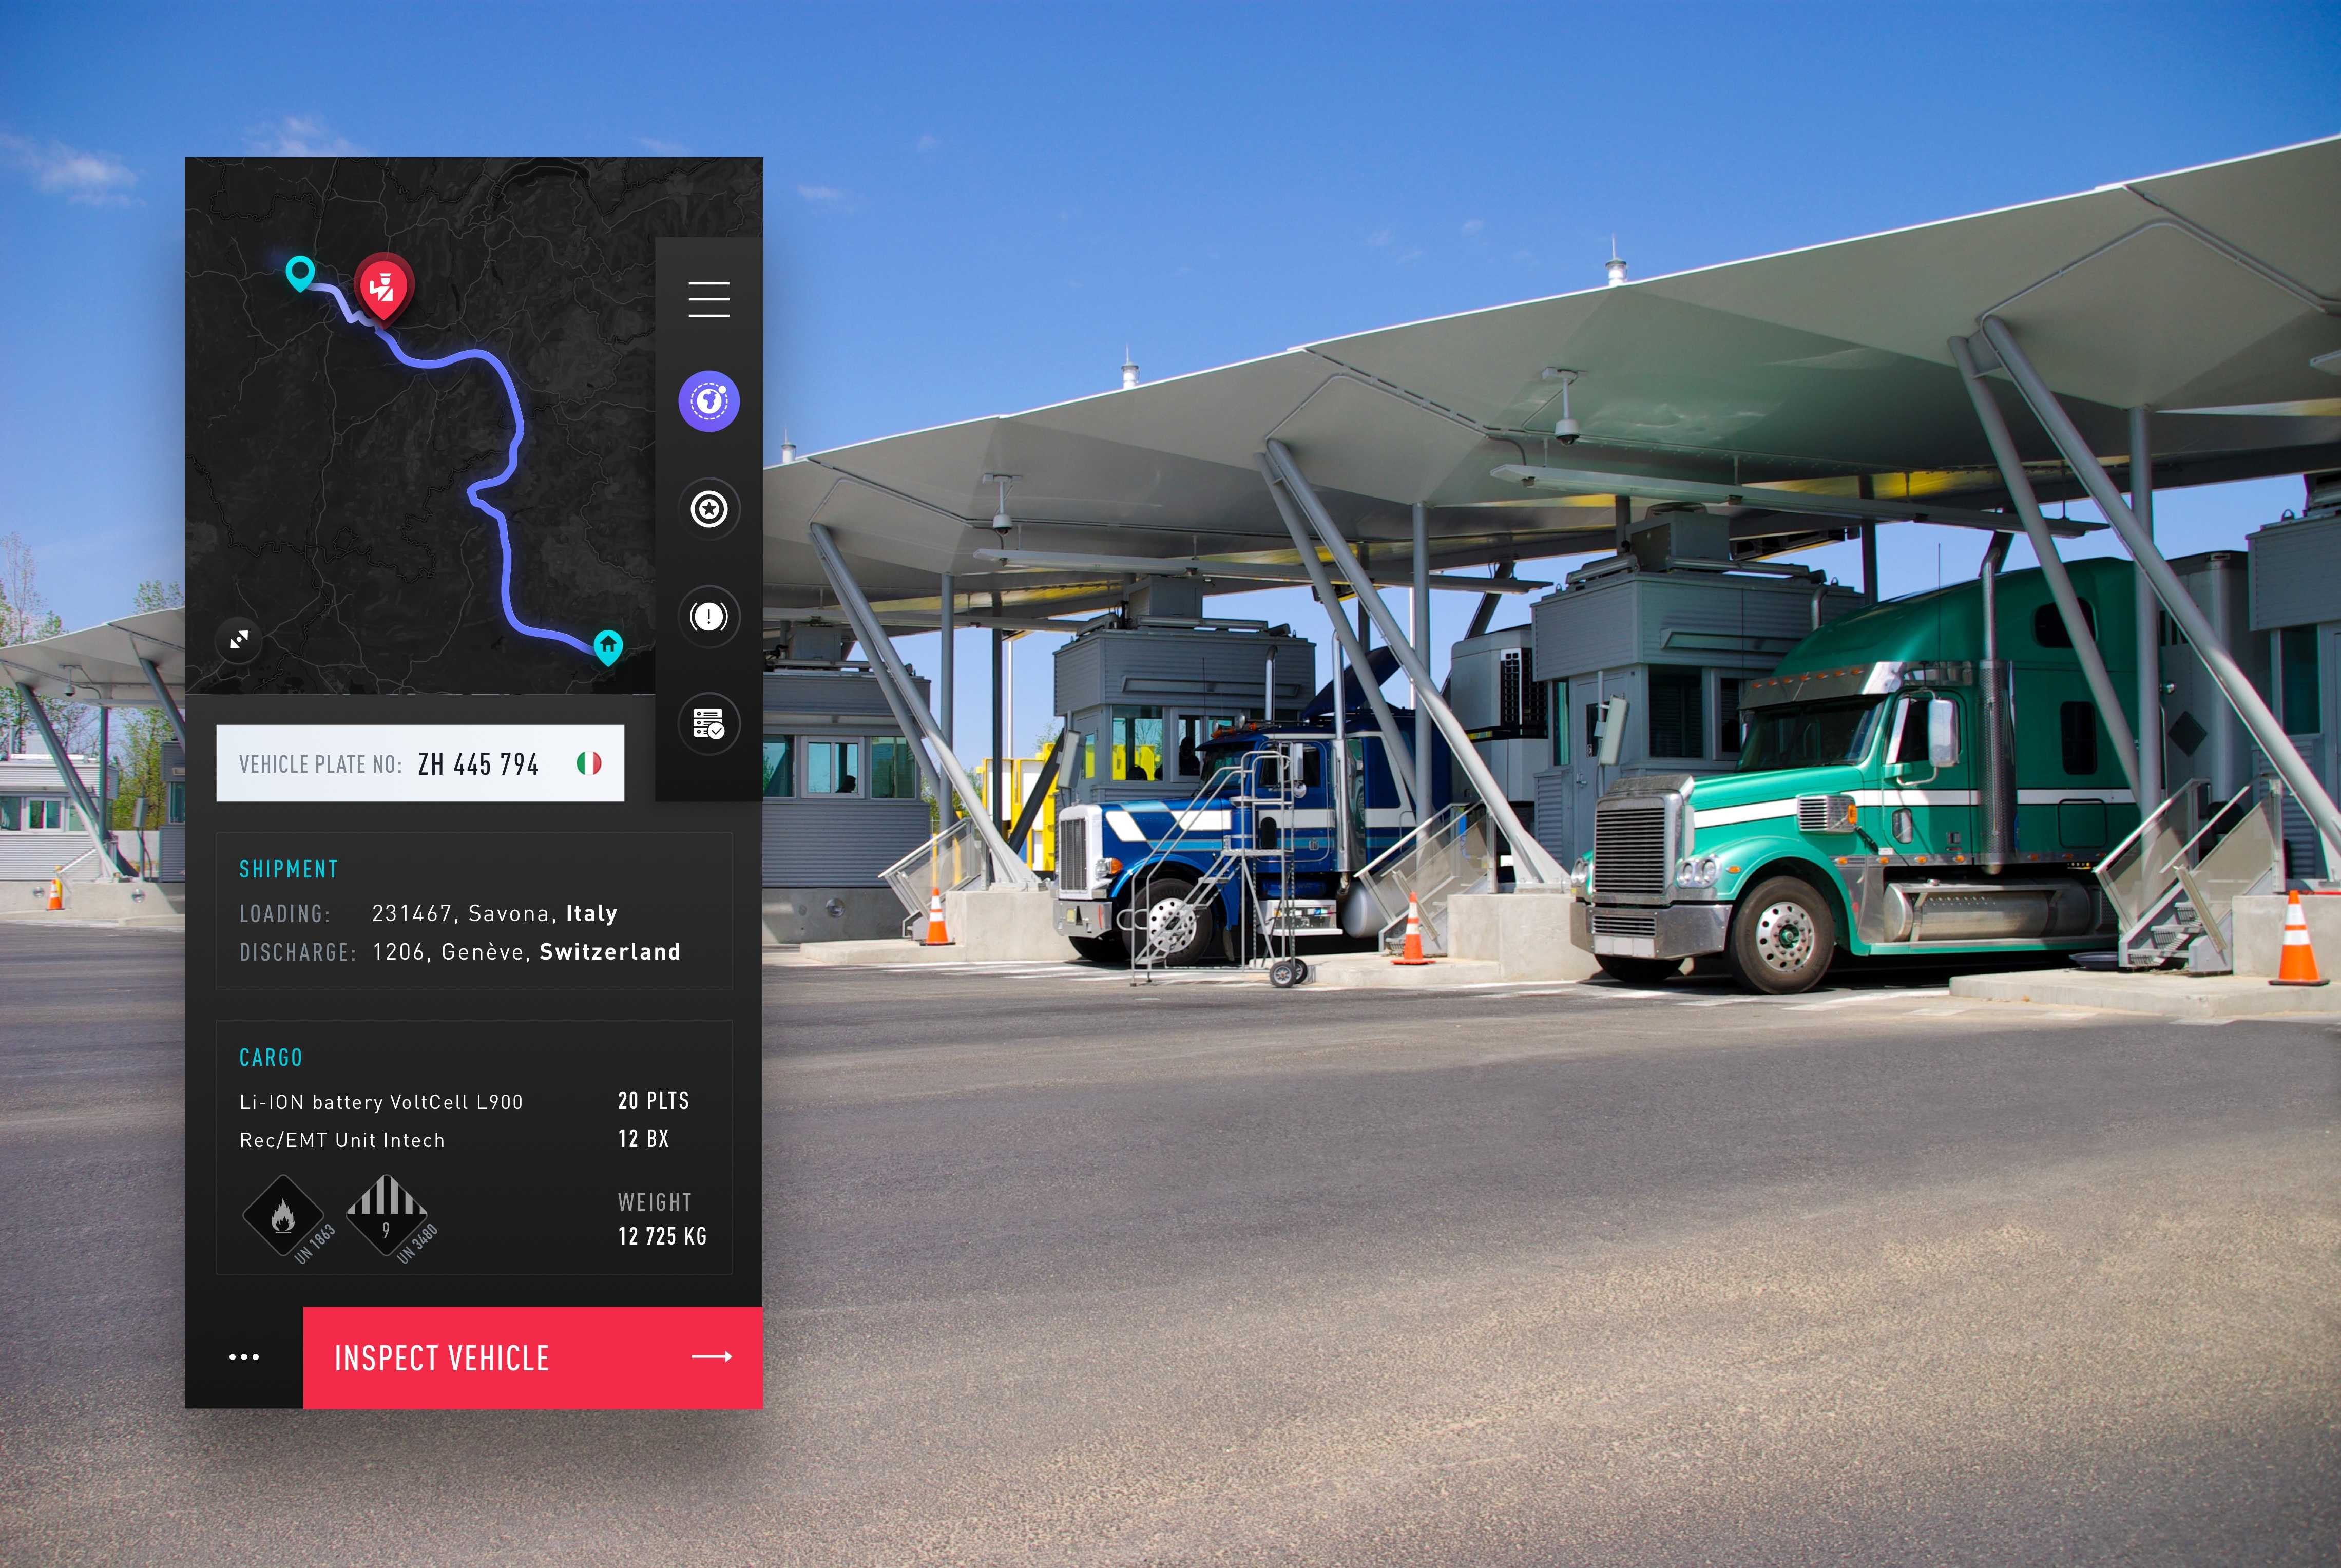 UI Design of intelligence application at border crossing with trucks waiting in background